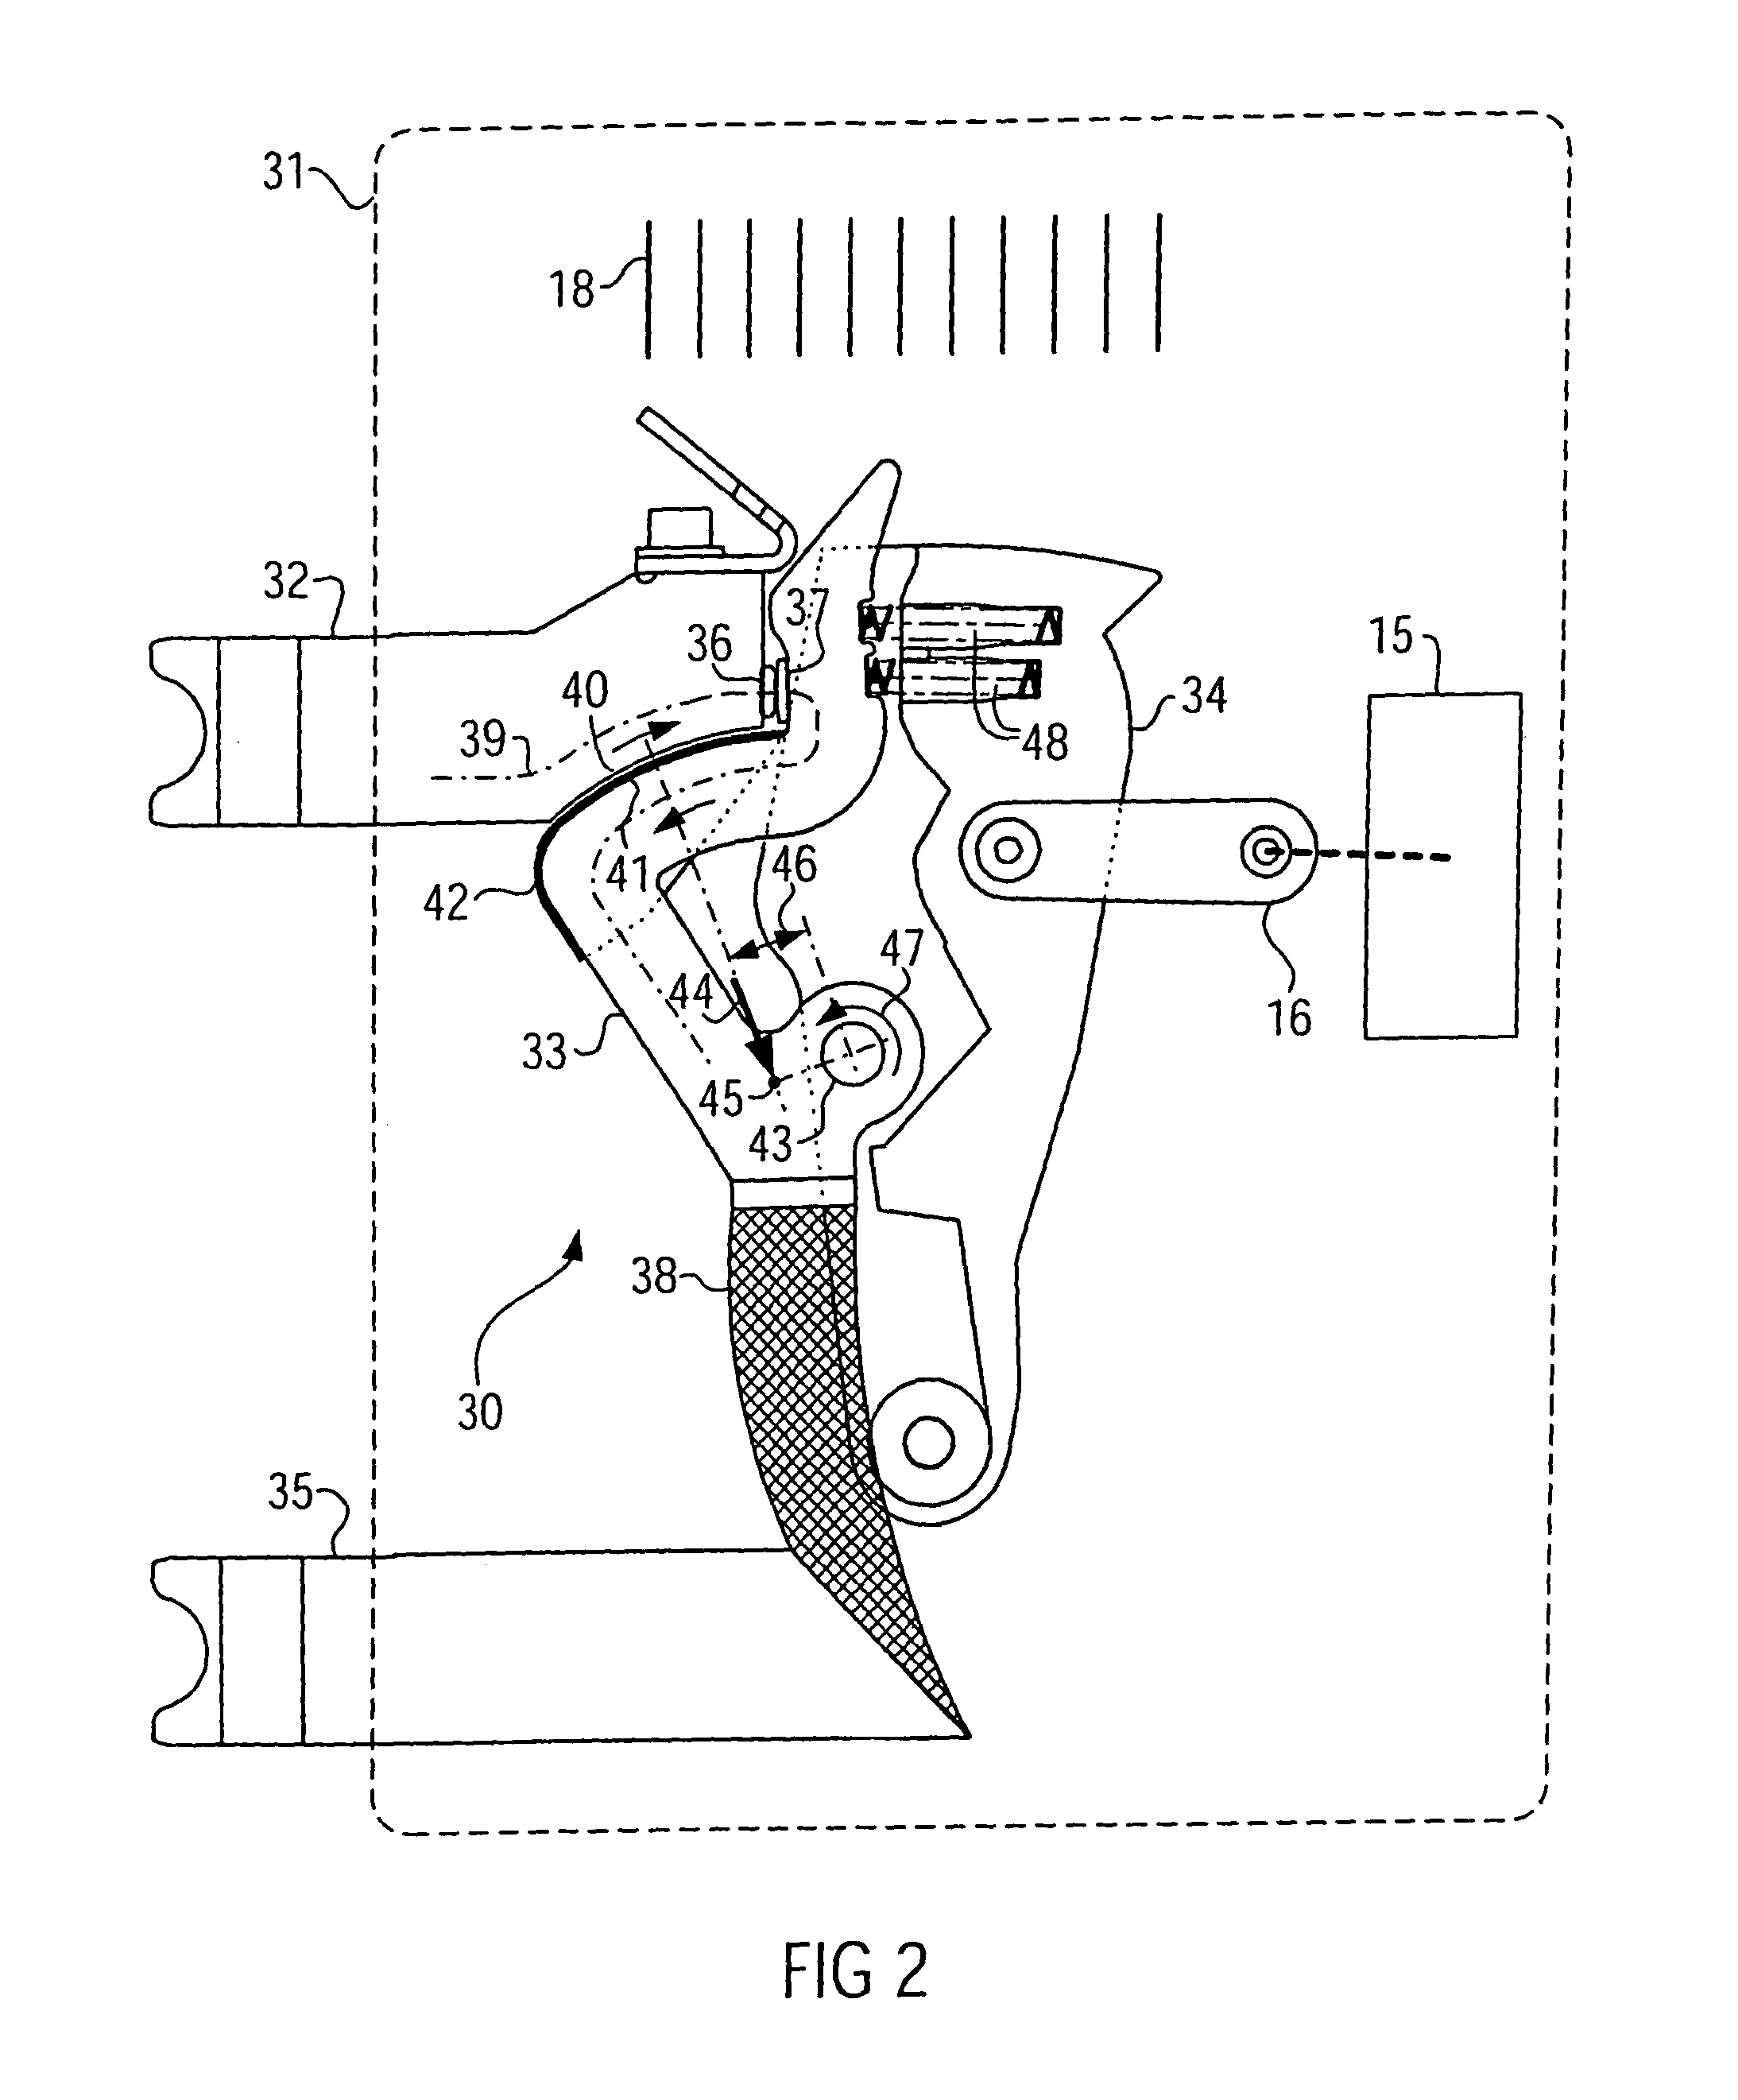 Electrical power breaker with a switching contact arrangement having a current loop